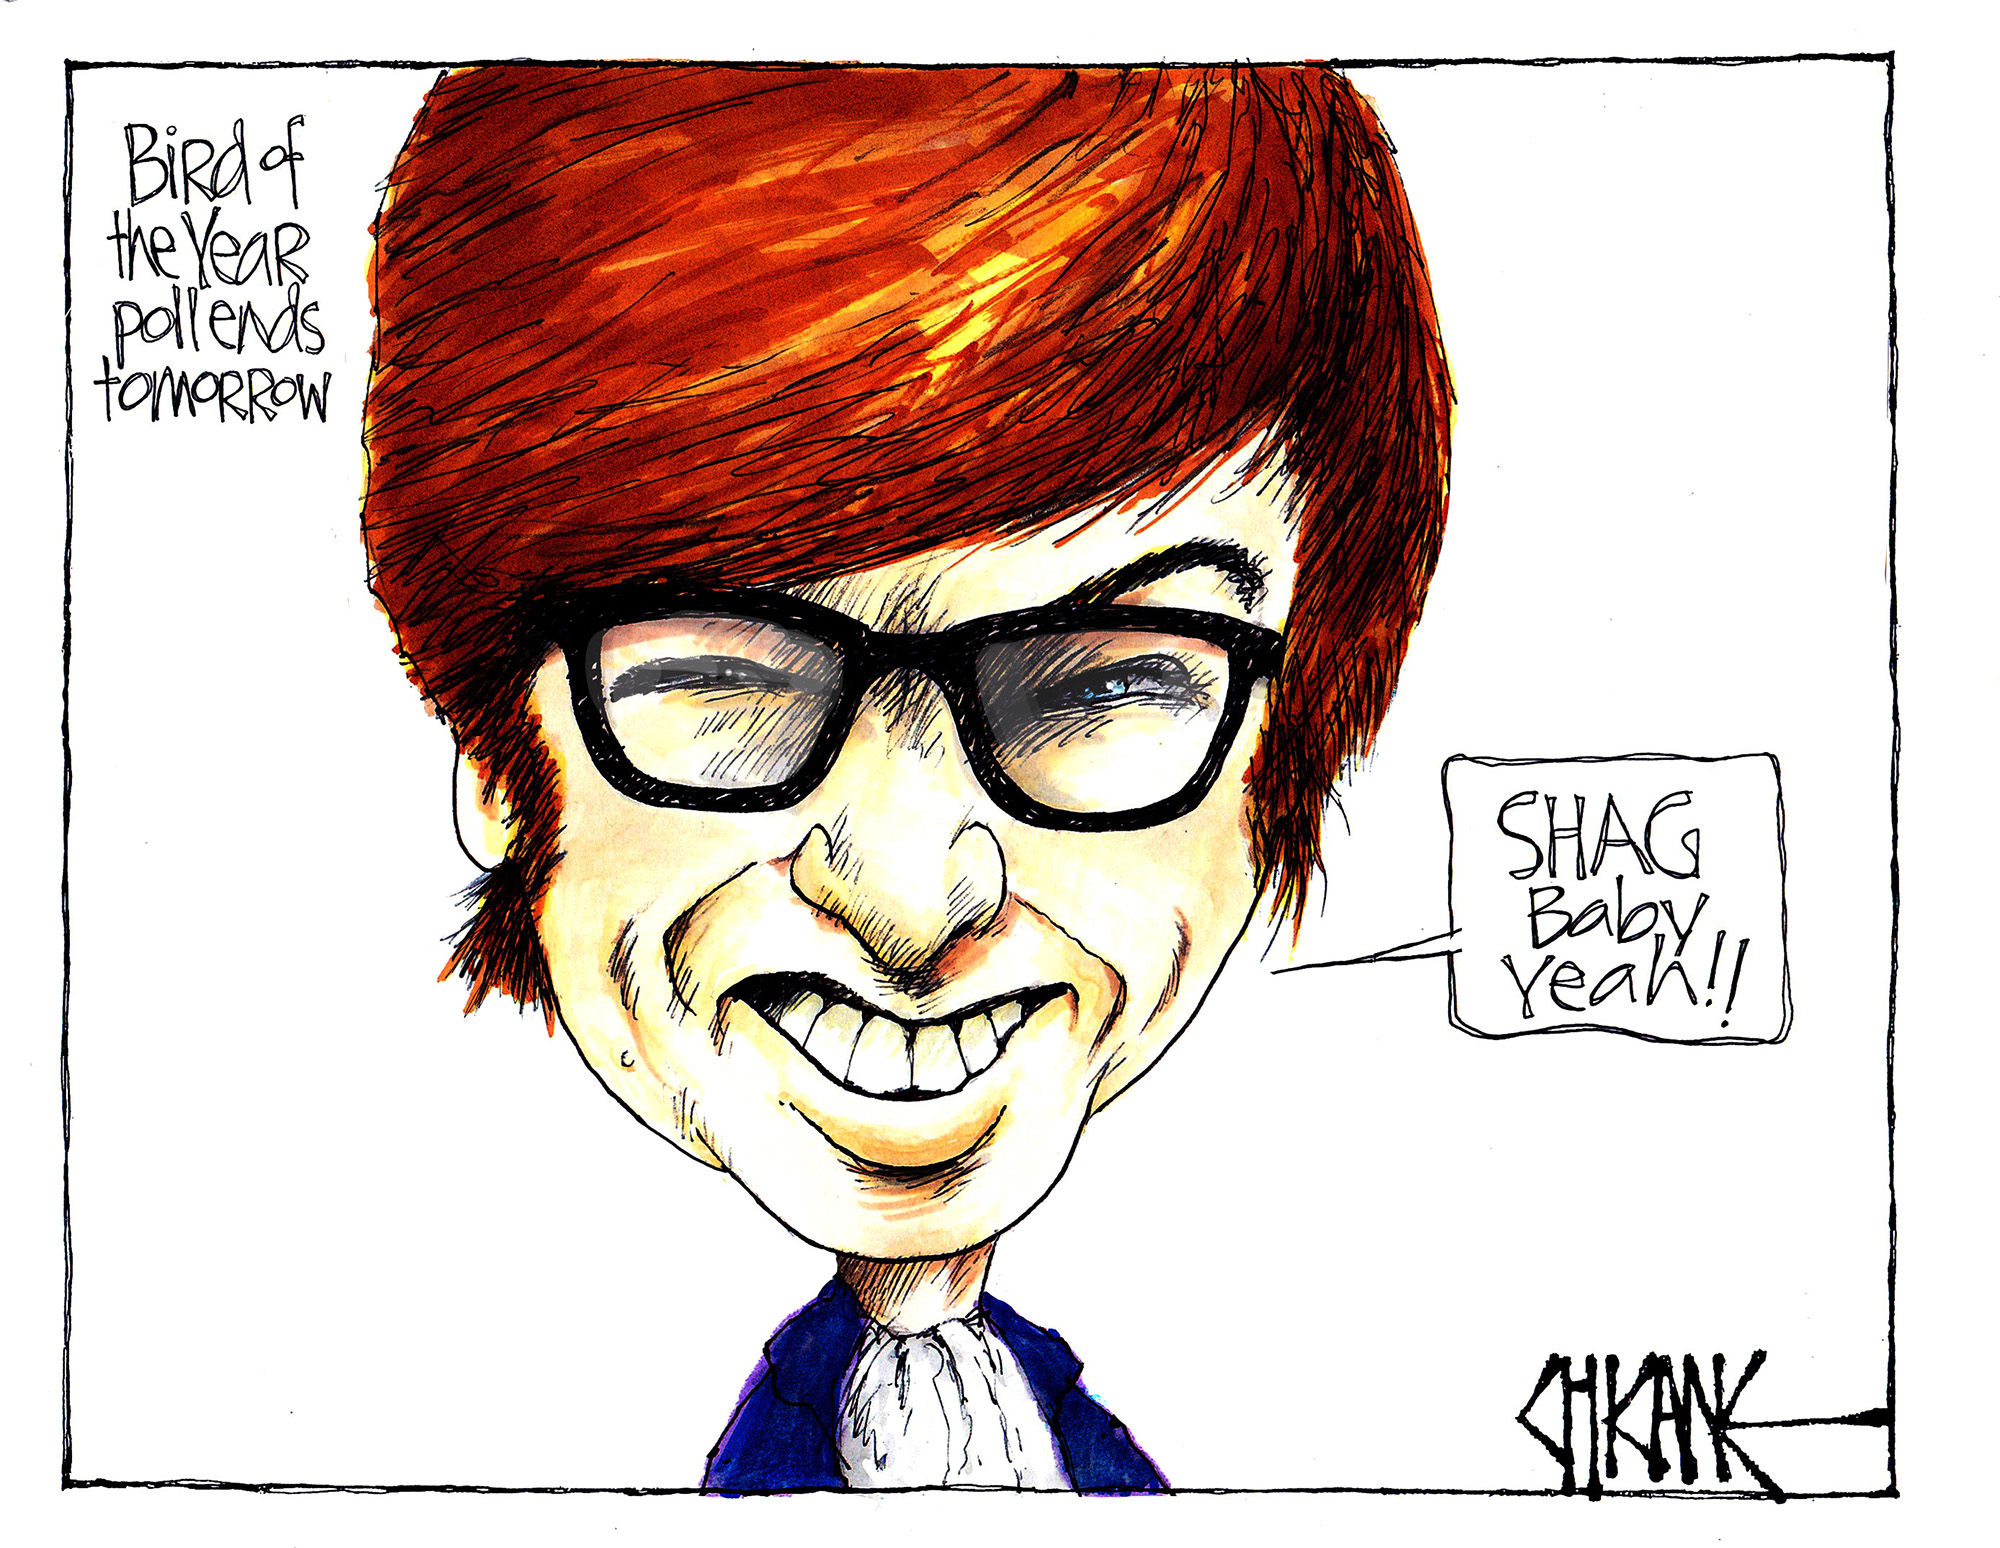 The New Zealand Bird of The Year poll ends tomorrow. Austin Powers says "Shag baby, yeah". Cartoon by Chicane